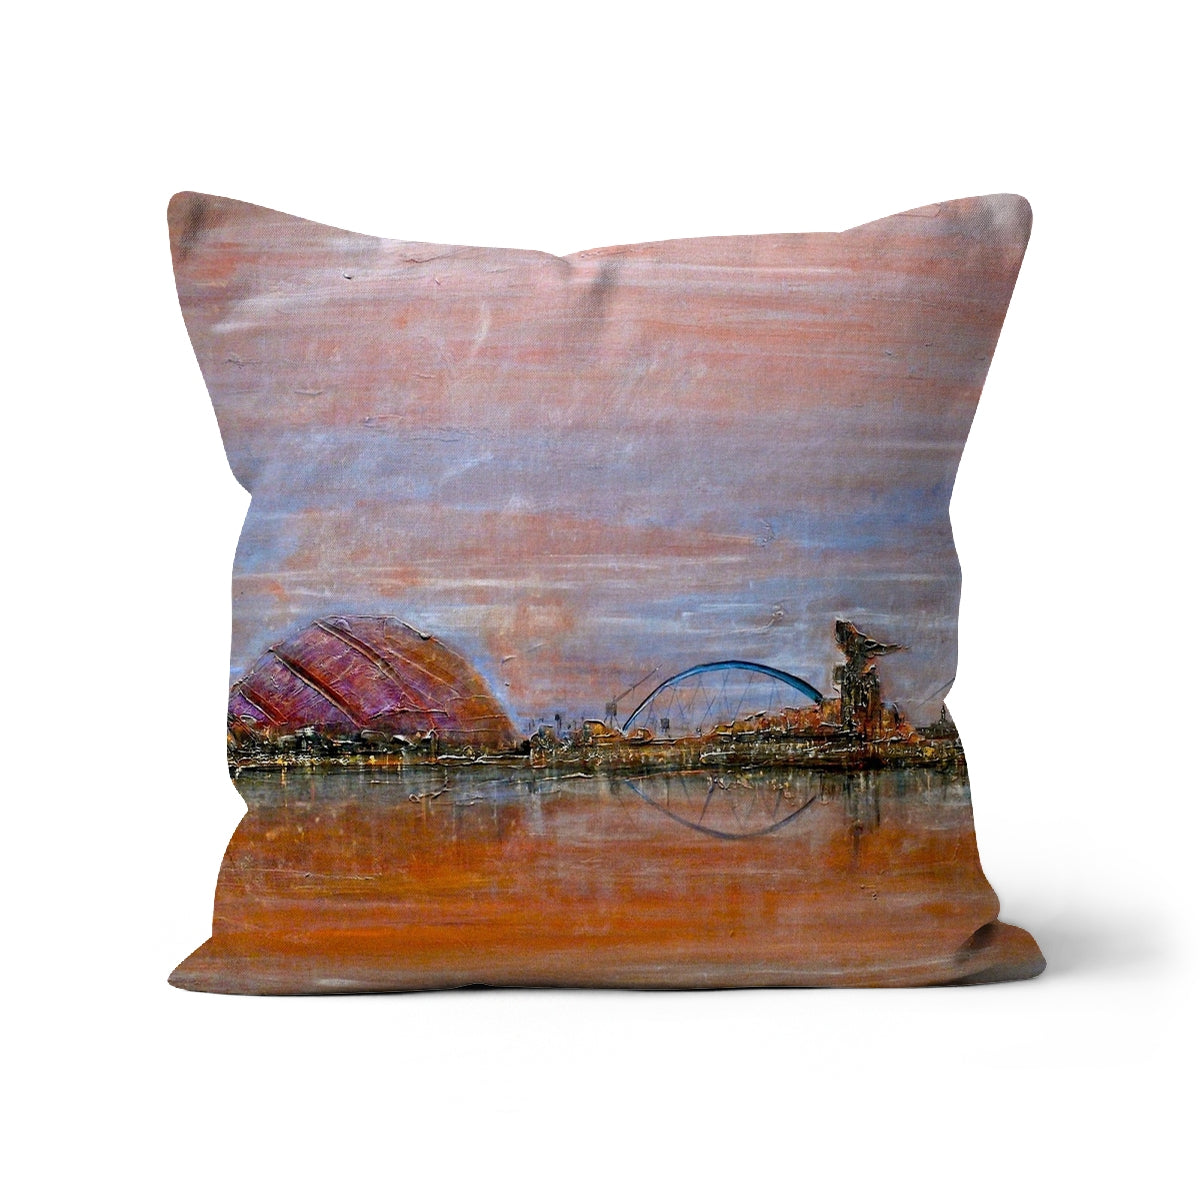 Glasgow Harbour Art Gifts Cushion-Cushions-Edinburgh & Glasgow Art Gallery-Faux Suede-22"x22"-Paintings, Prints, Homeware, Art Gifts From Scotland By Scottish Artist Kevin Hunter